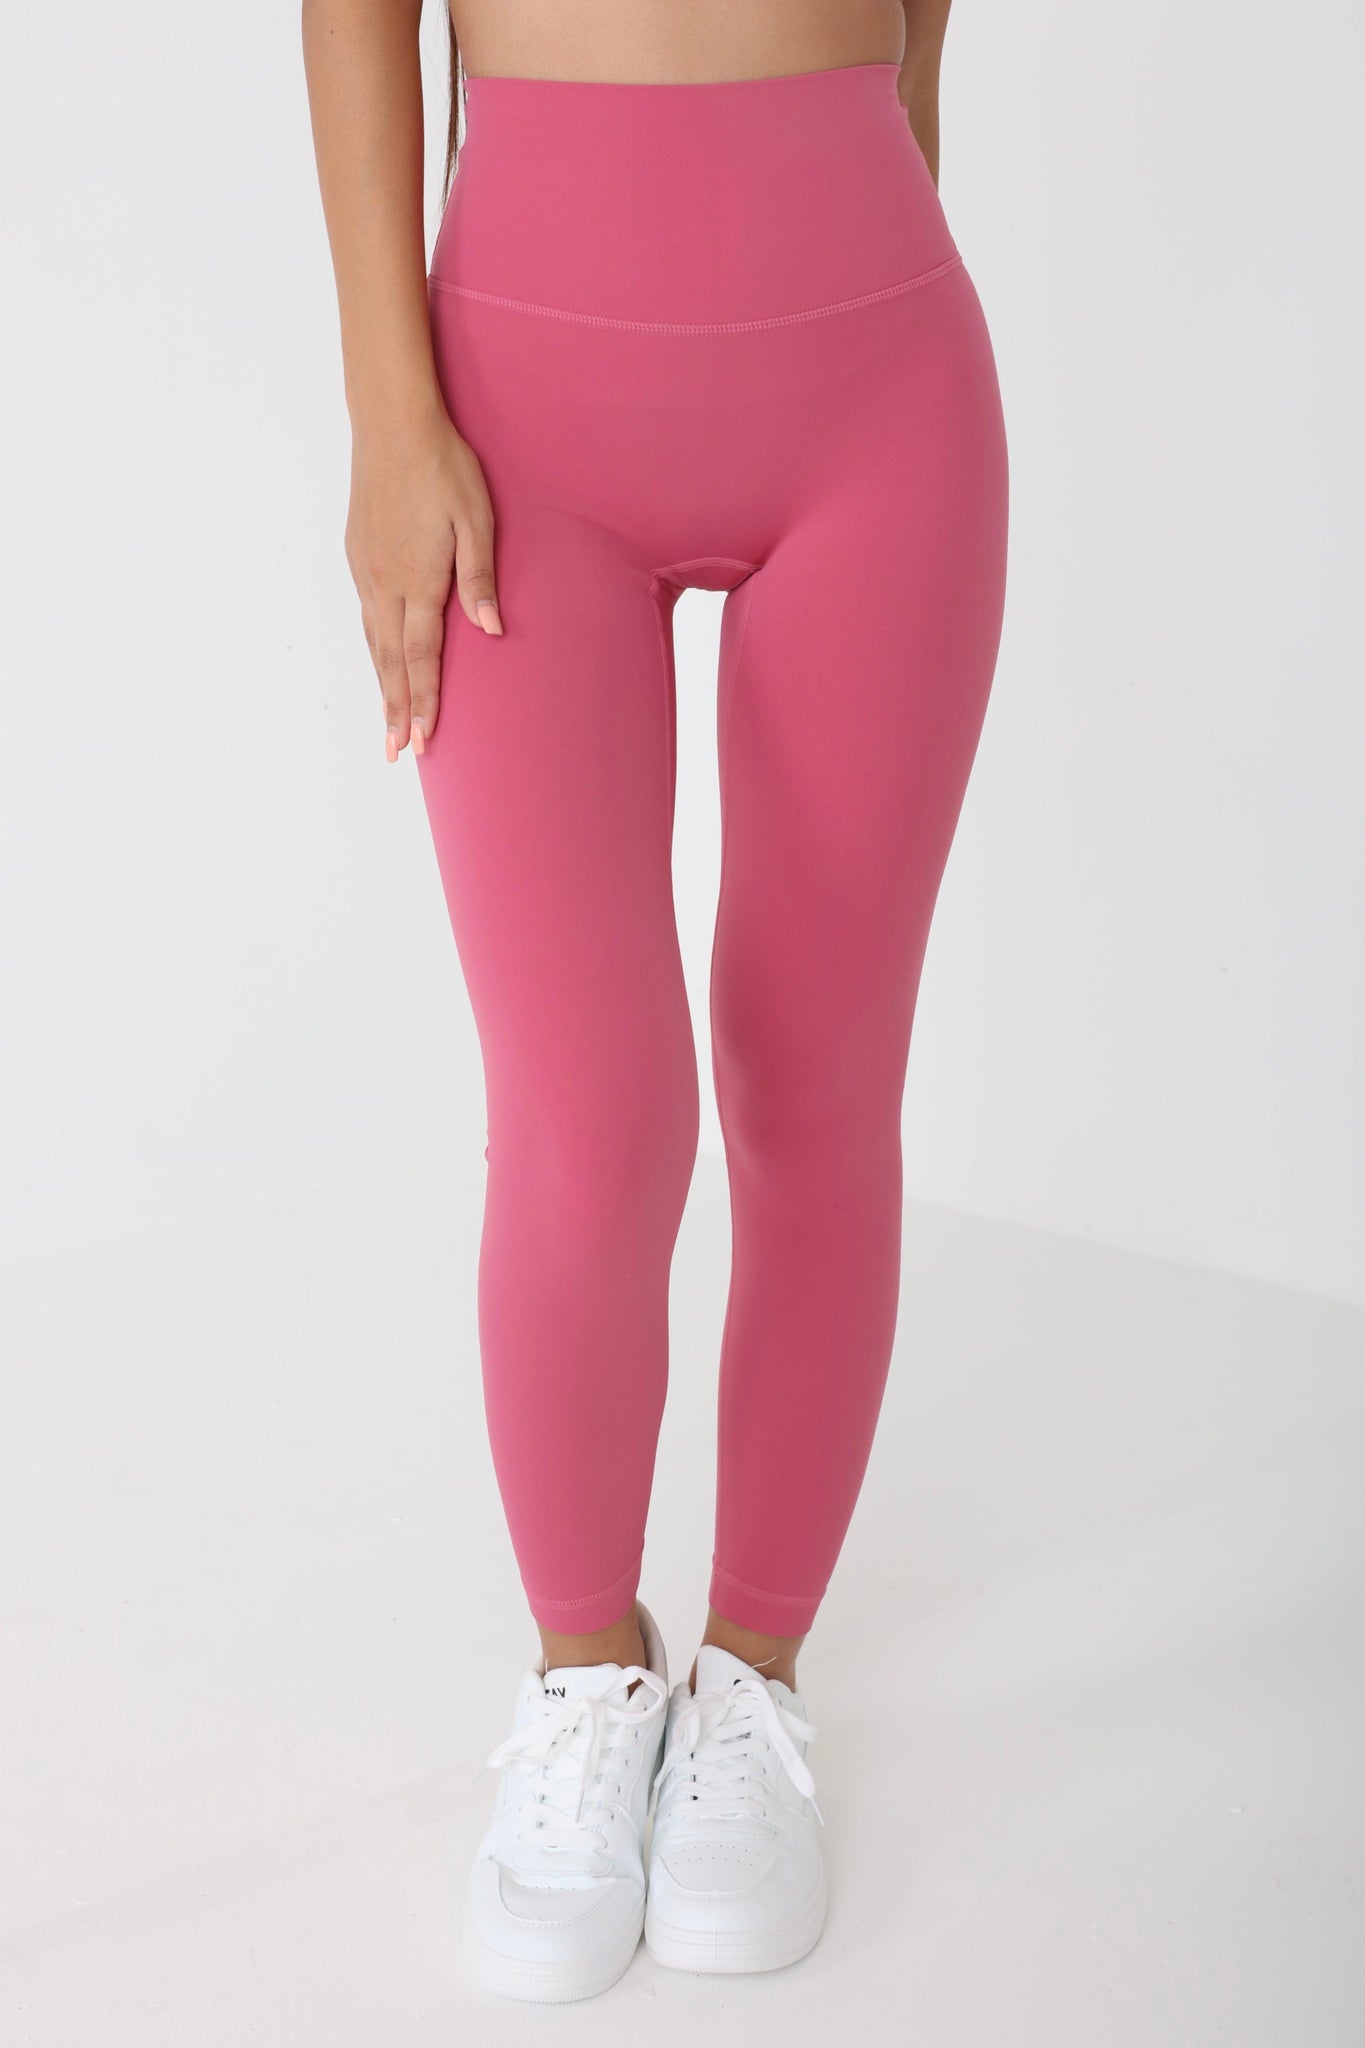 JUV fresh legging in pink color, close up front view.